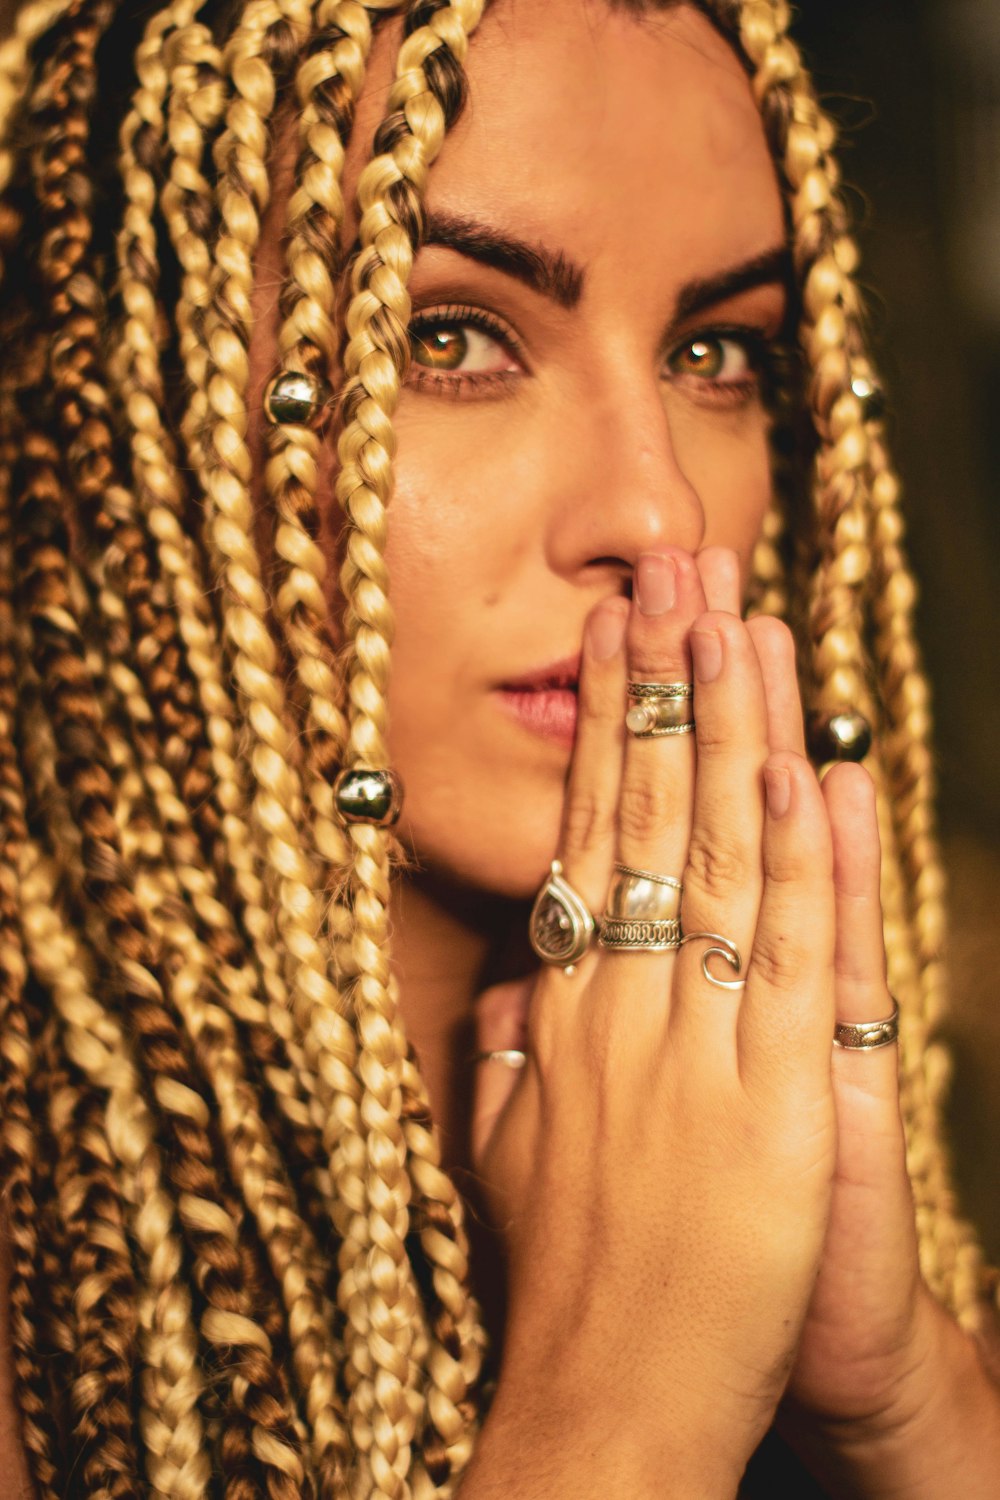 woman with braided hair putting hands near her mouth